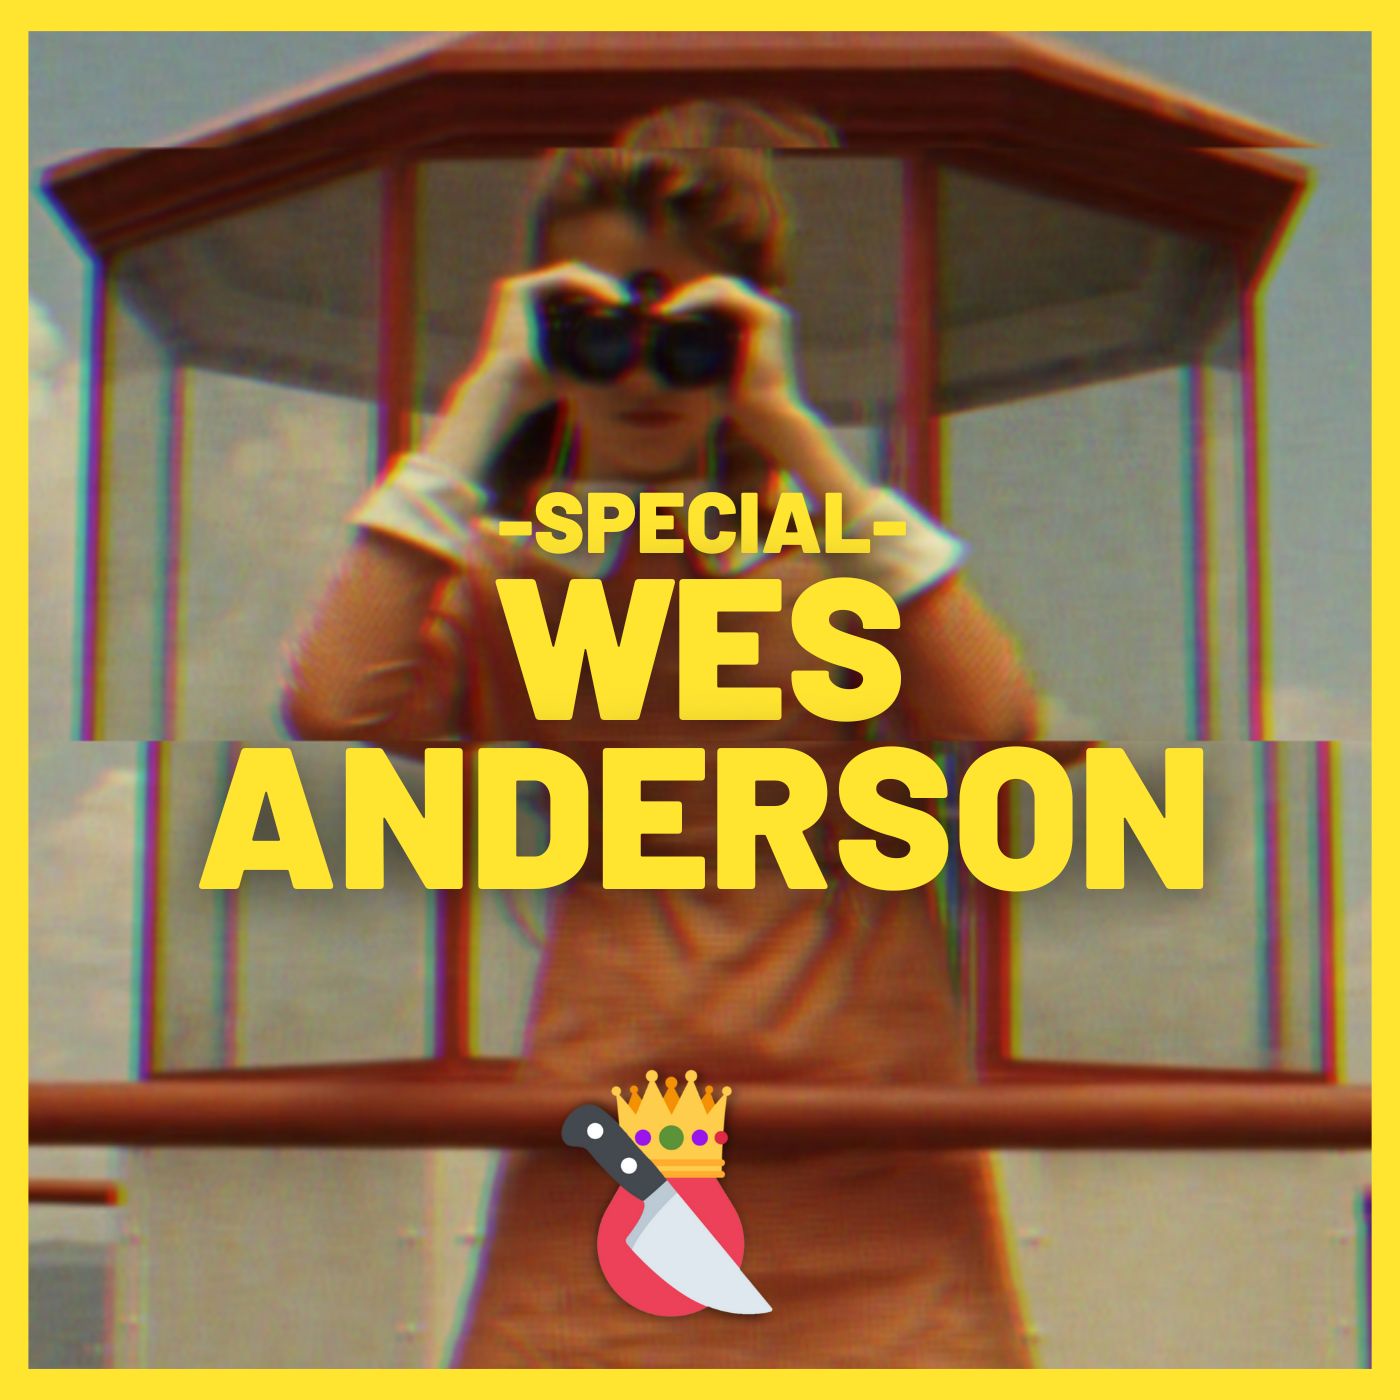 Special: Wes Anderson (Teaser)